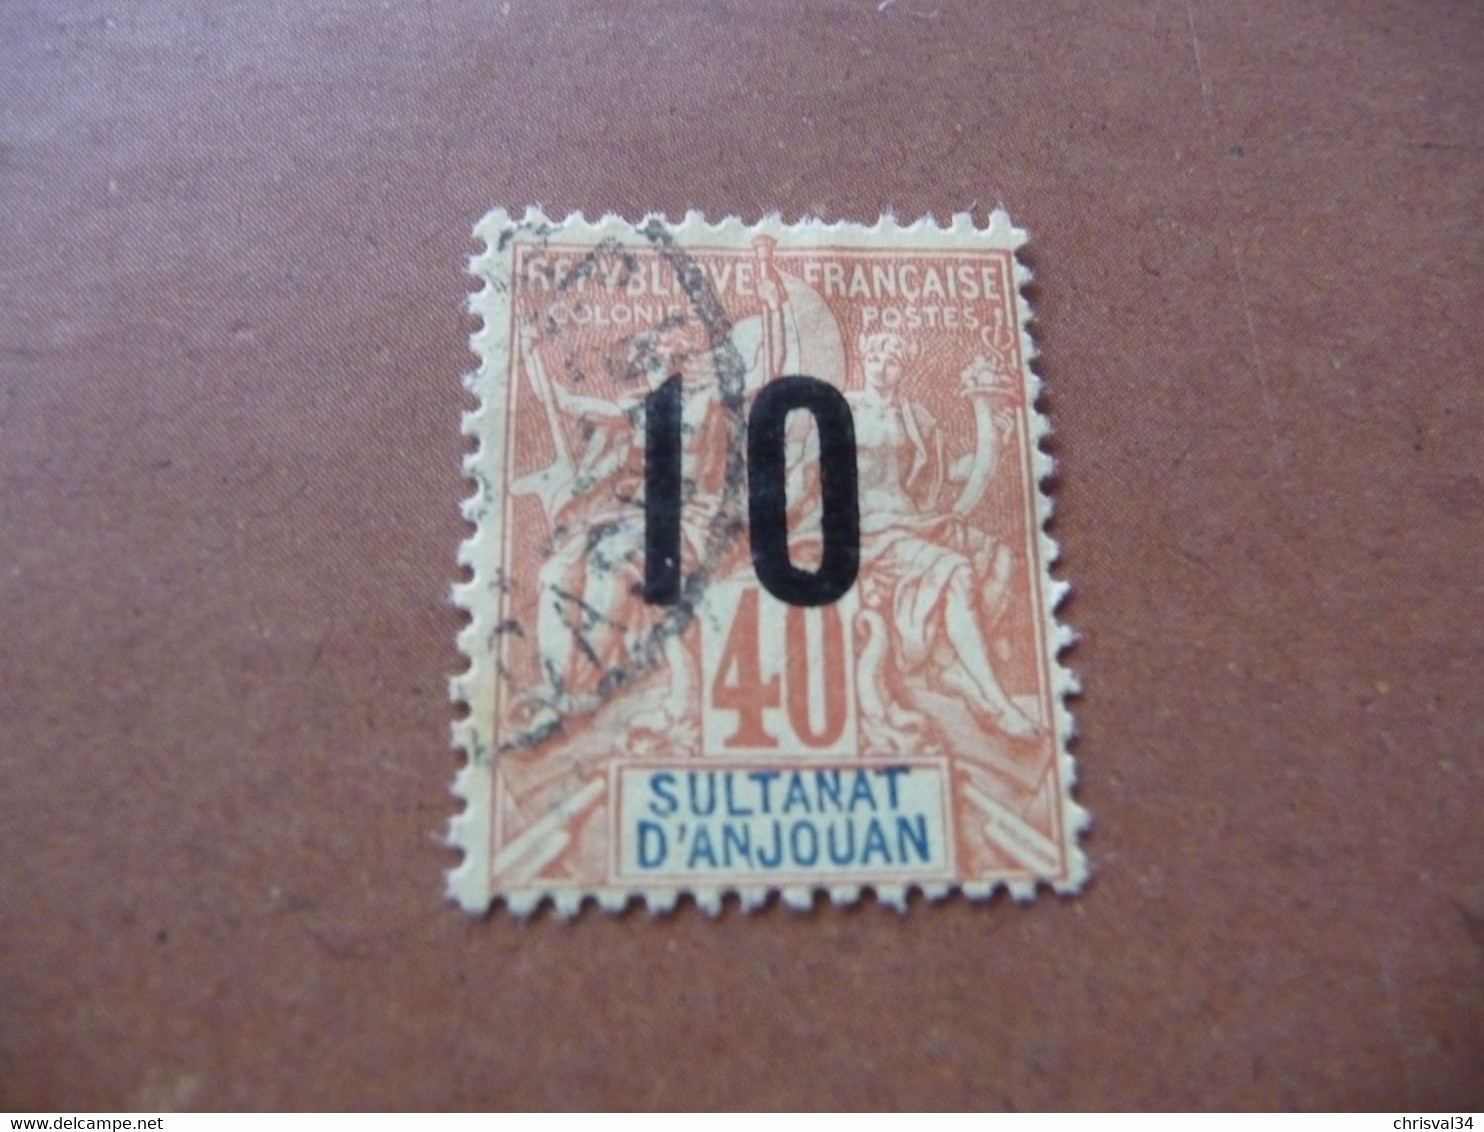 TIMBRE   ANJOUAN       N  26      COTE  4,00  EUROS   OBLITERE - Used Stamps